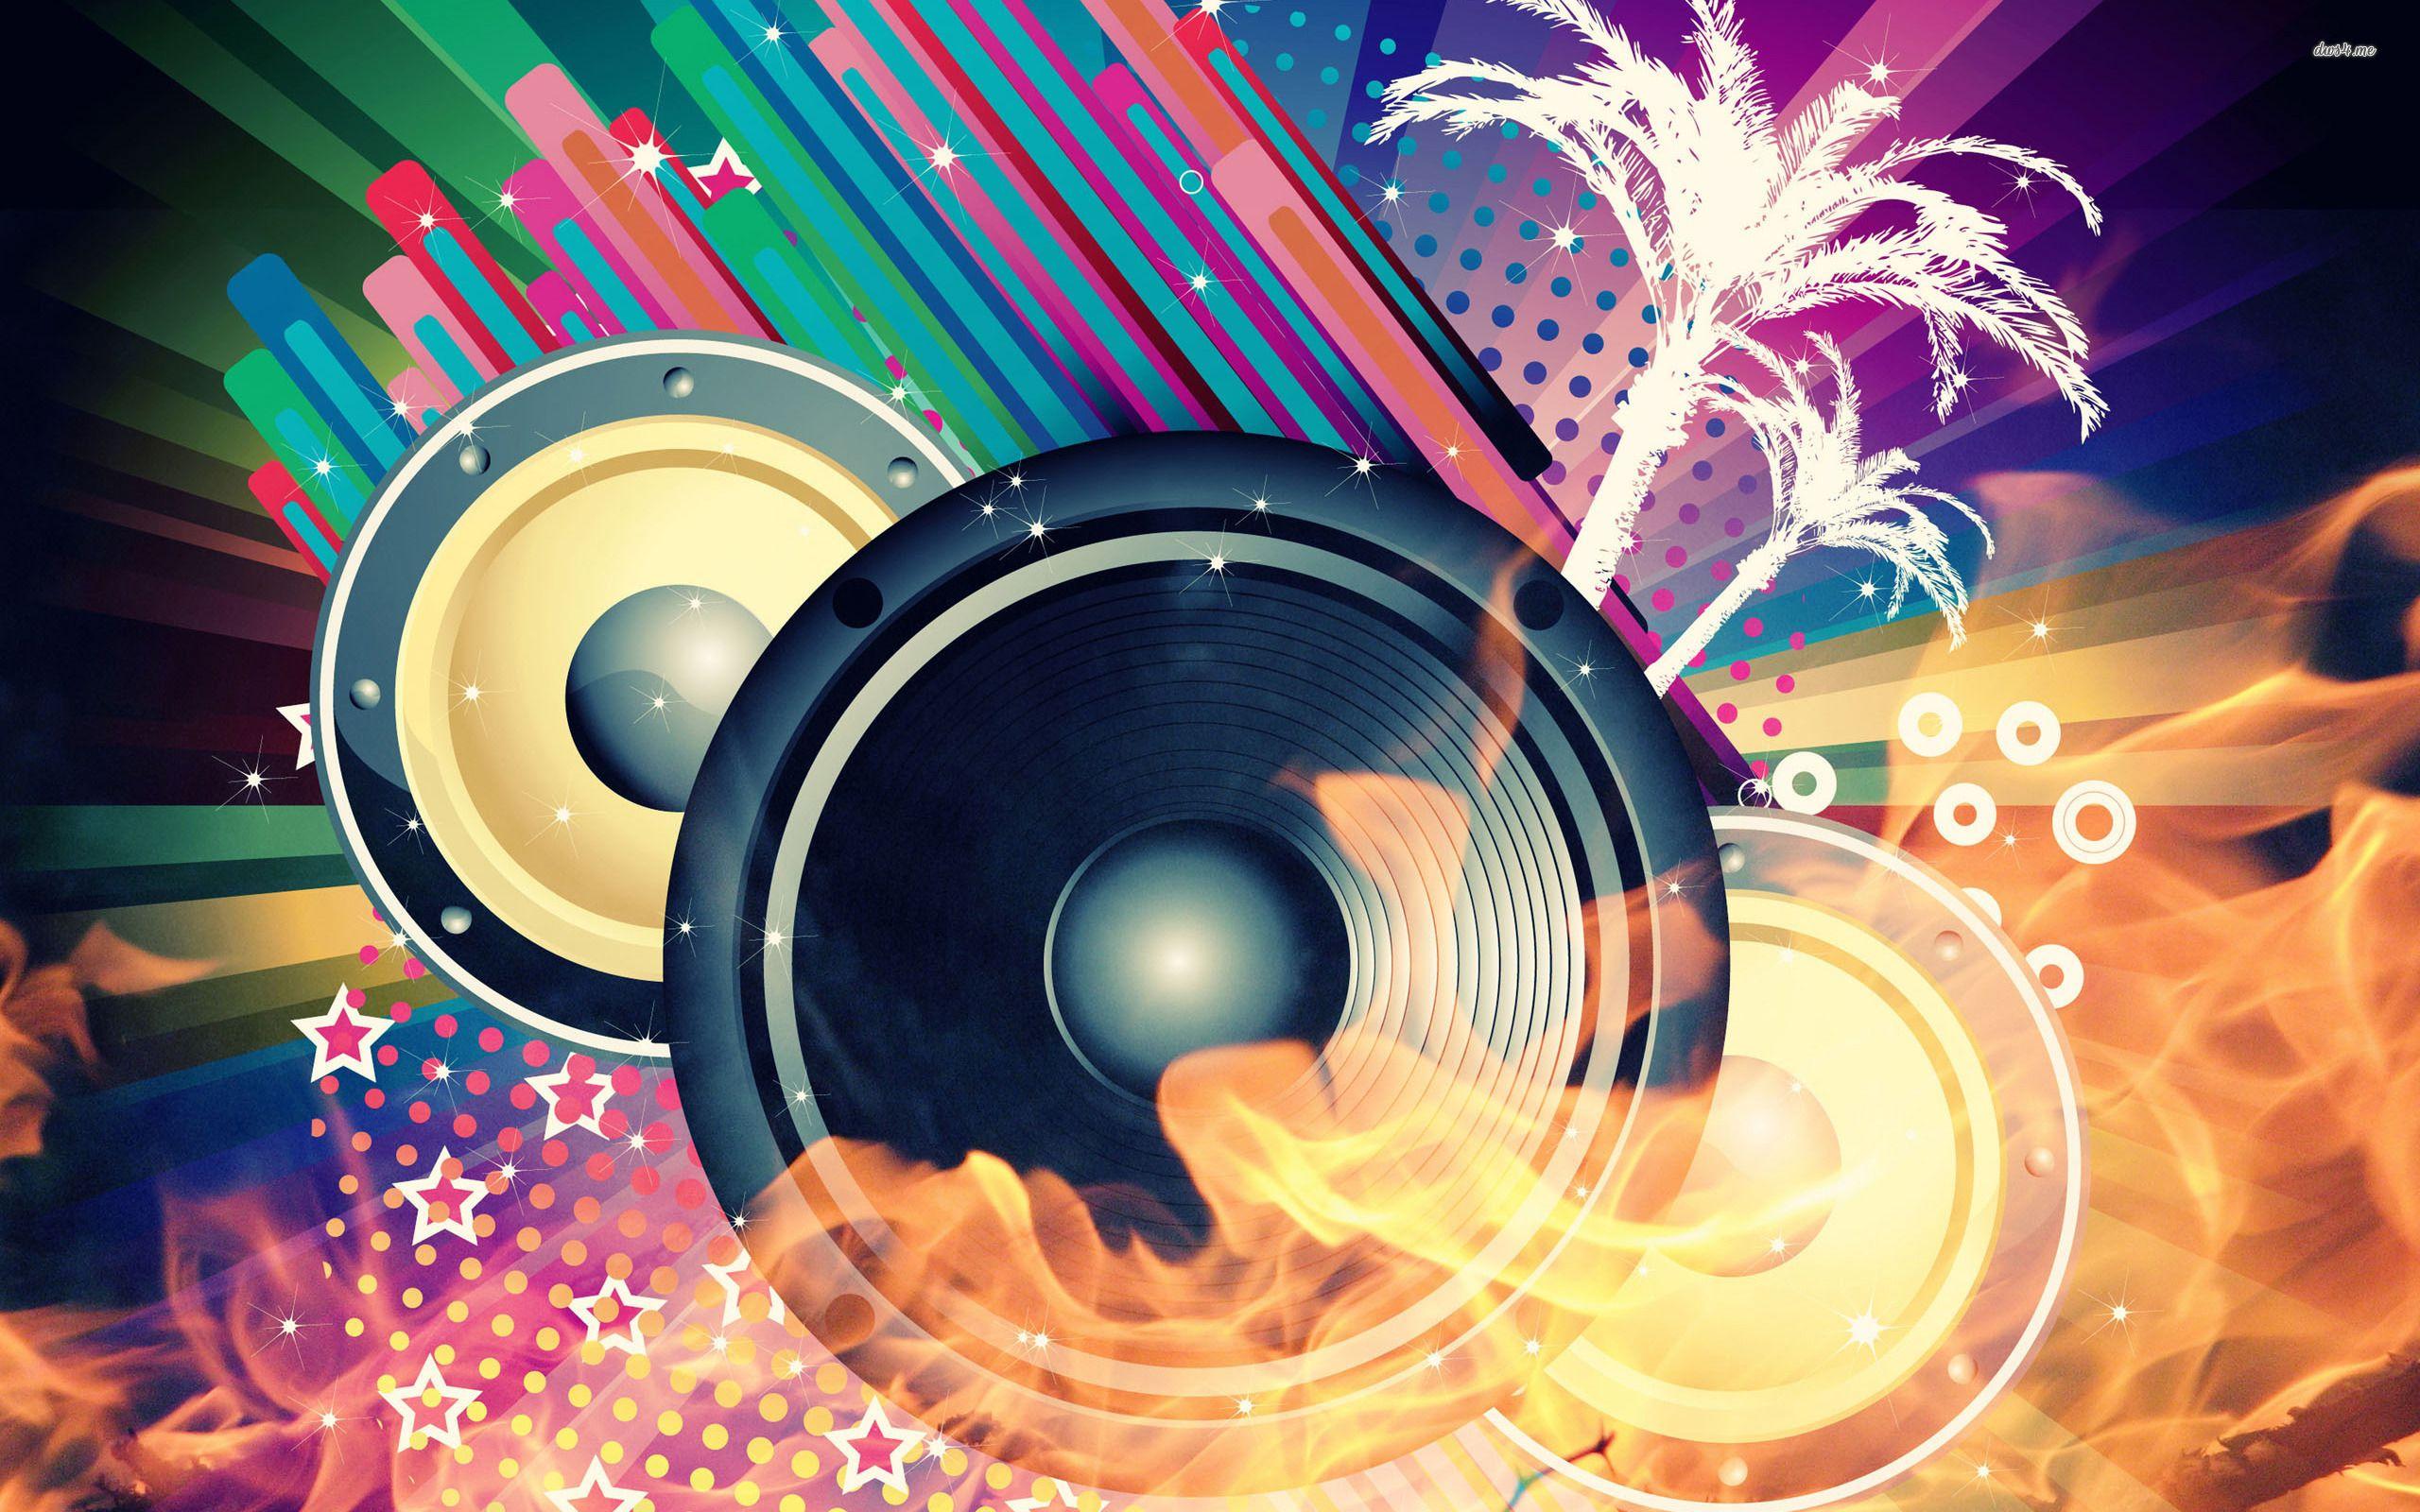 Abstract Colorful Music Sound Wave Wallpaper Vector Illustration Royalty  Free SVG, Cliparts, Vectors, and Stock Illustration. Image 12811227.